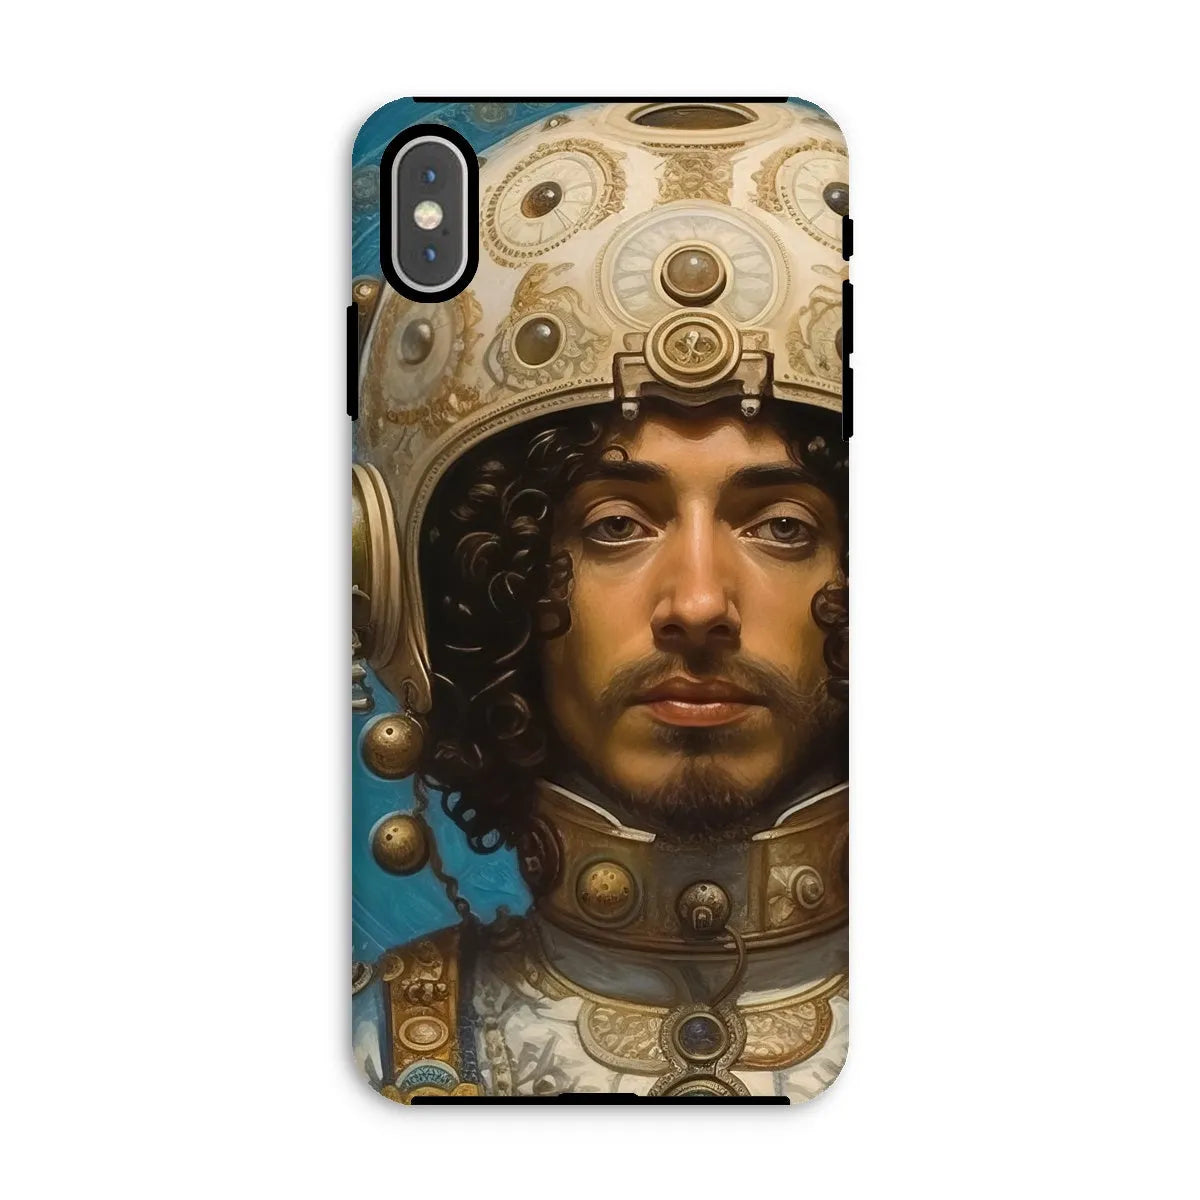 Mehdi The Gay Astronaut - Lgbtq Art Phone Case - Iphone Xs Max / Matte - Mobile Phone Cases - Aesthetic Art